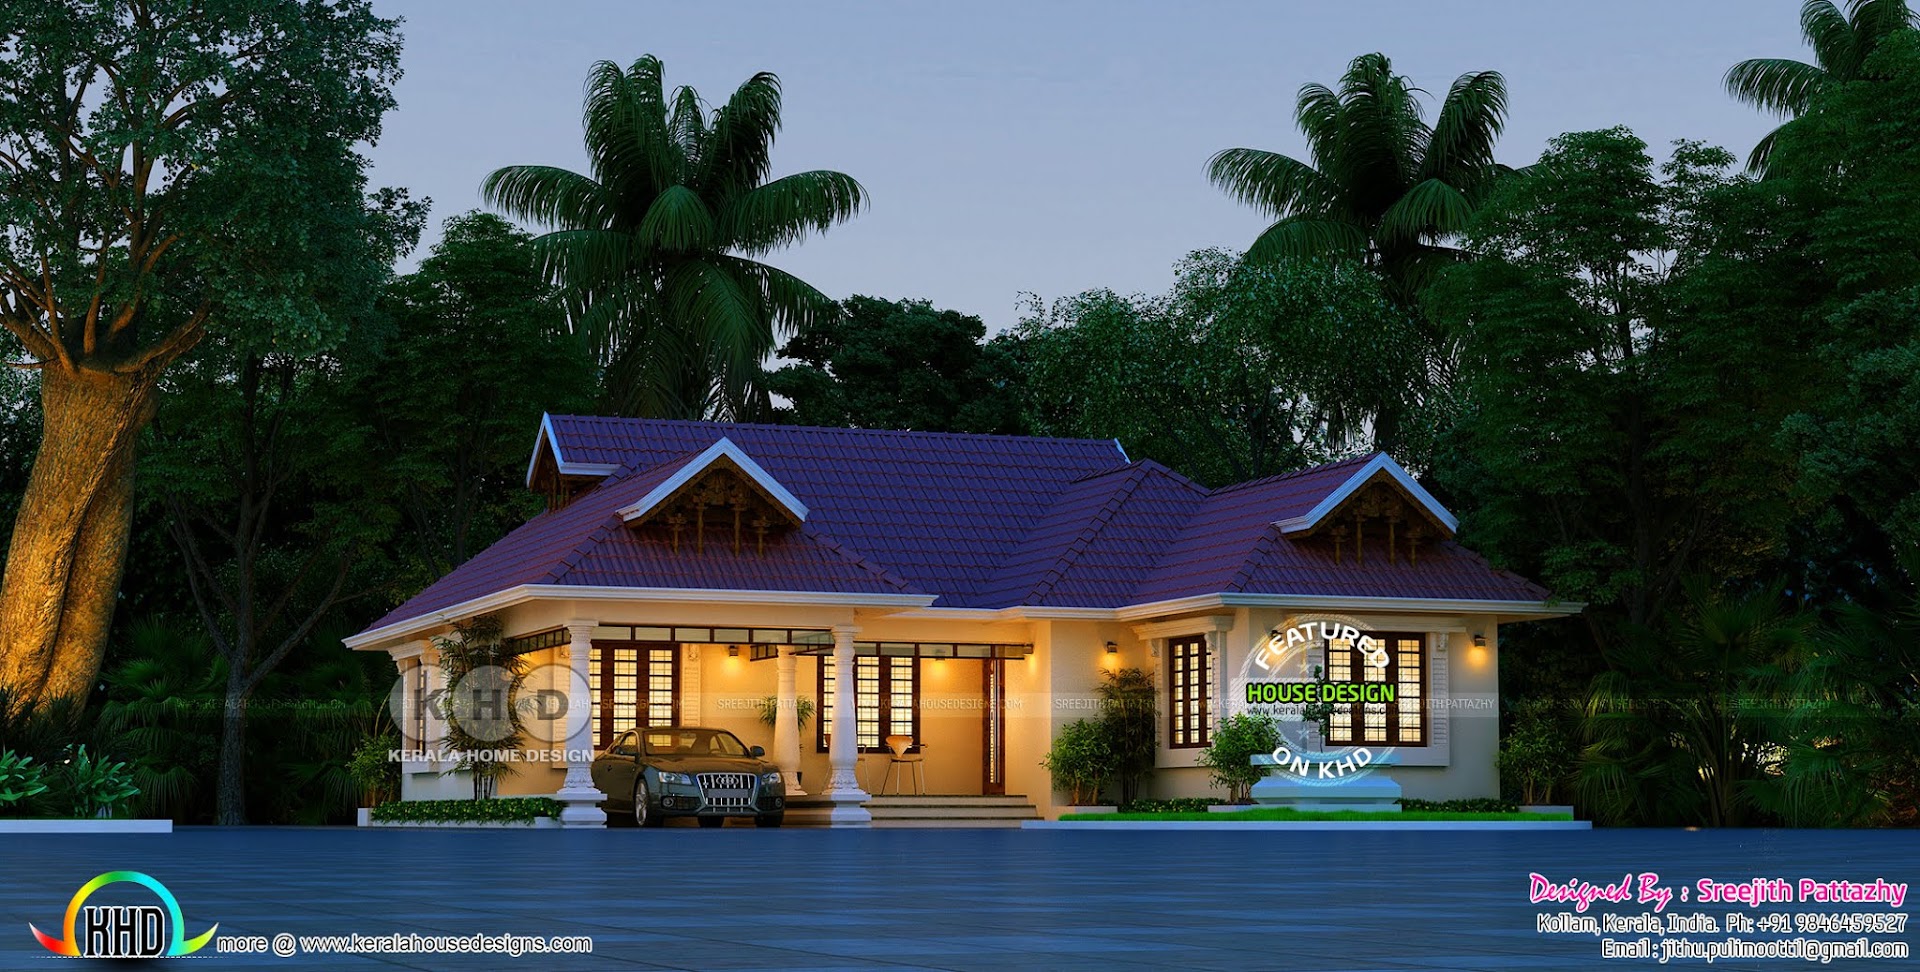 Superb New Kerala traditional house 1620 sq-ft - Kerala home design and